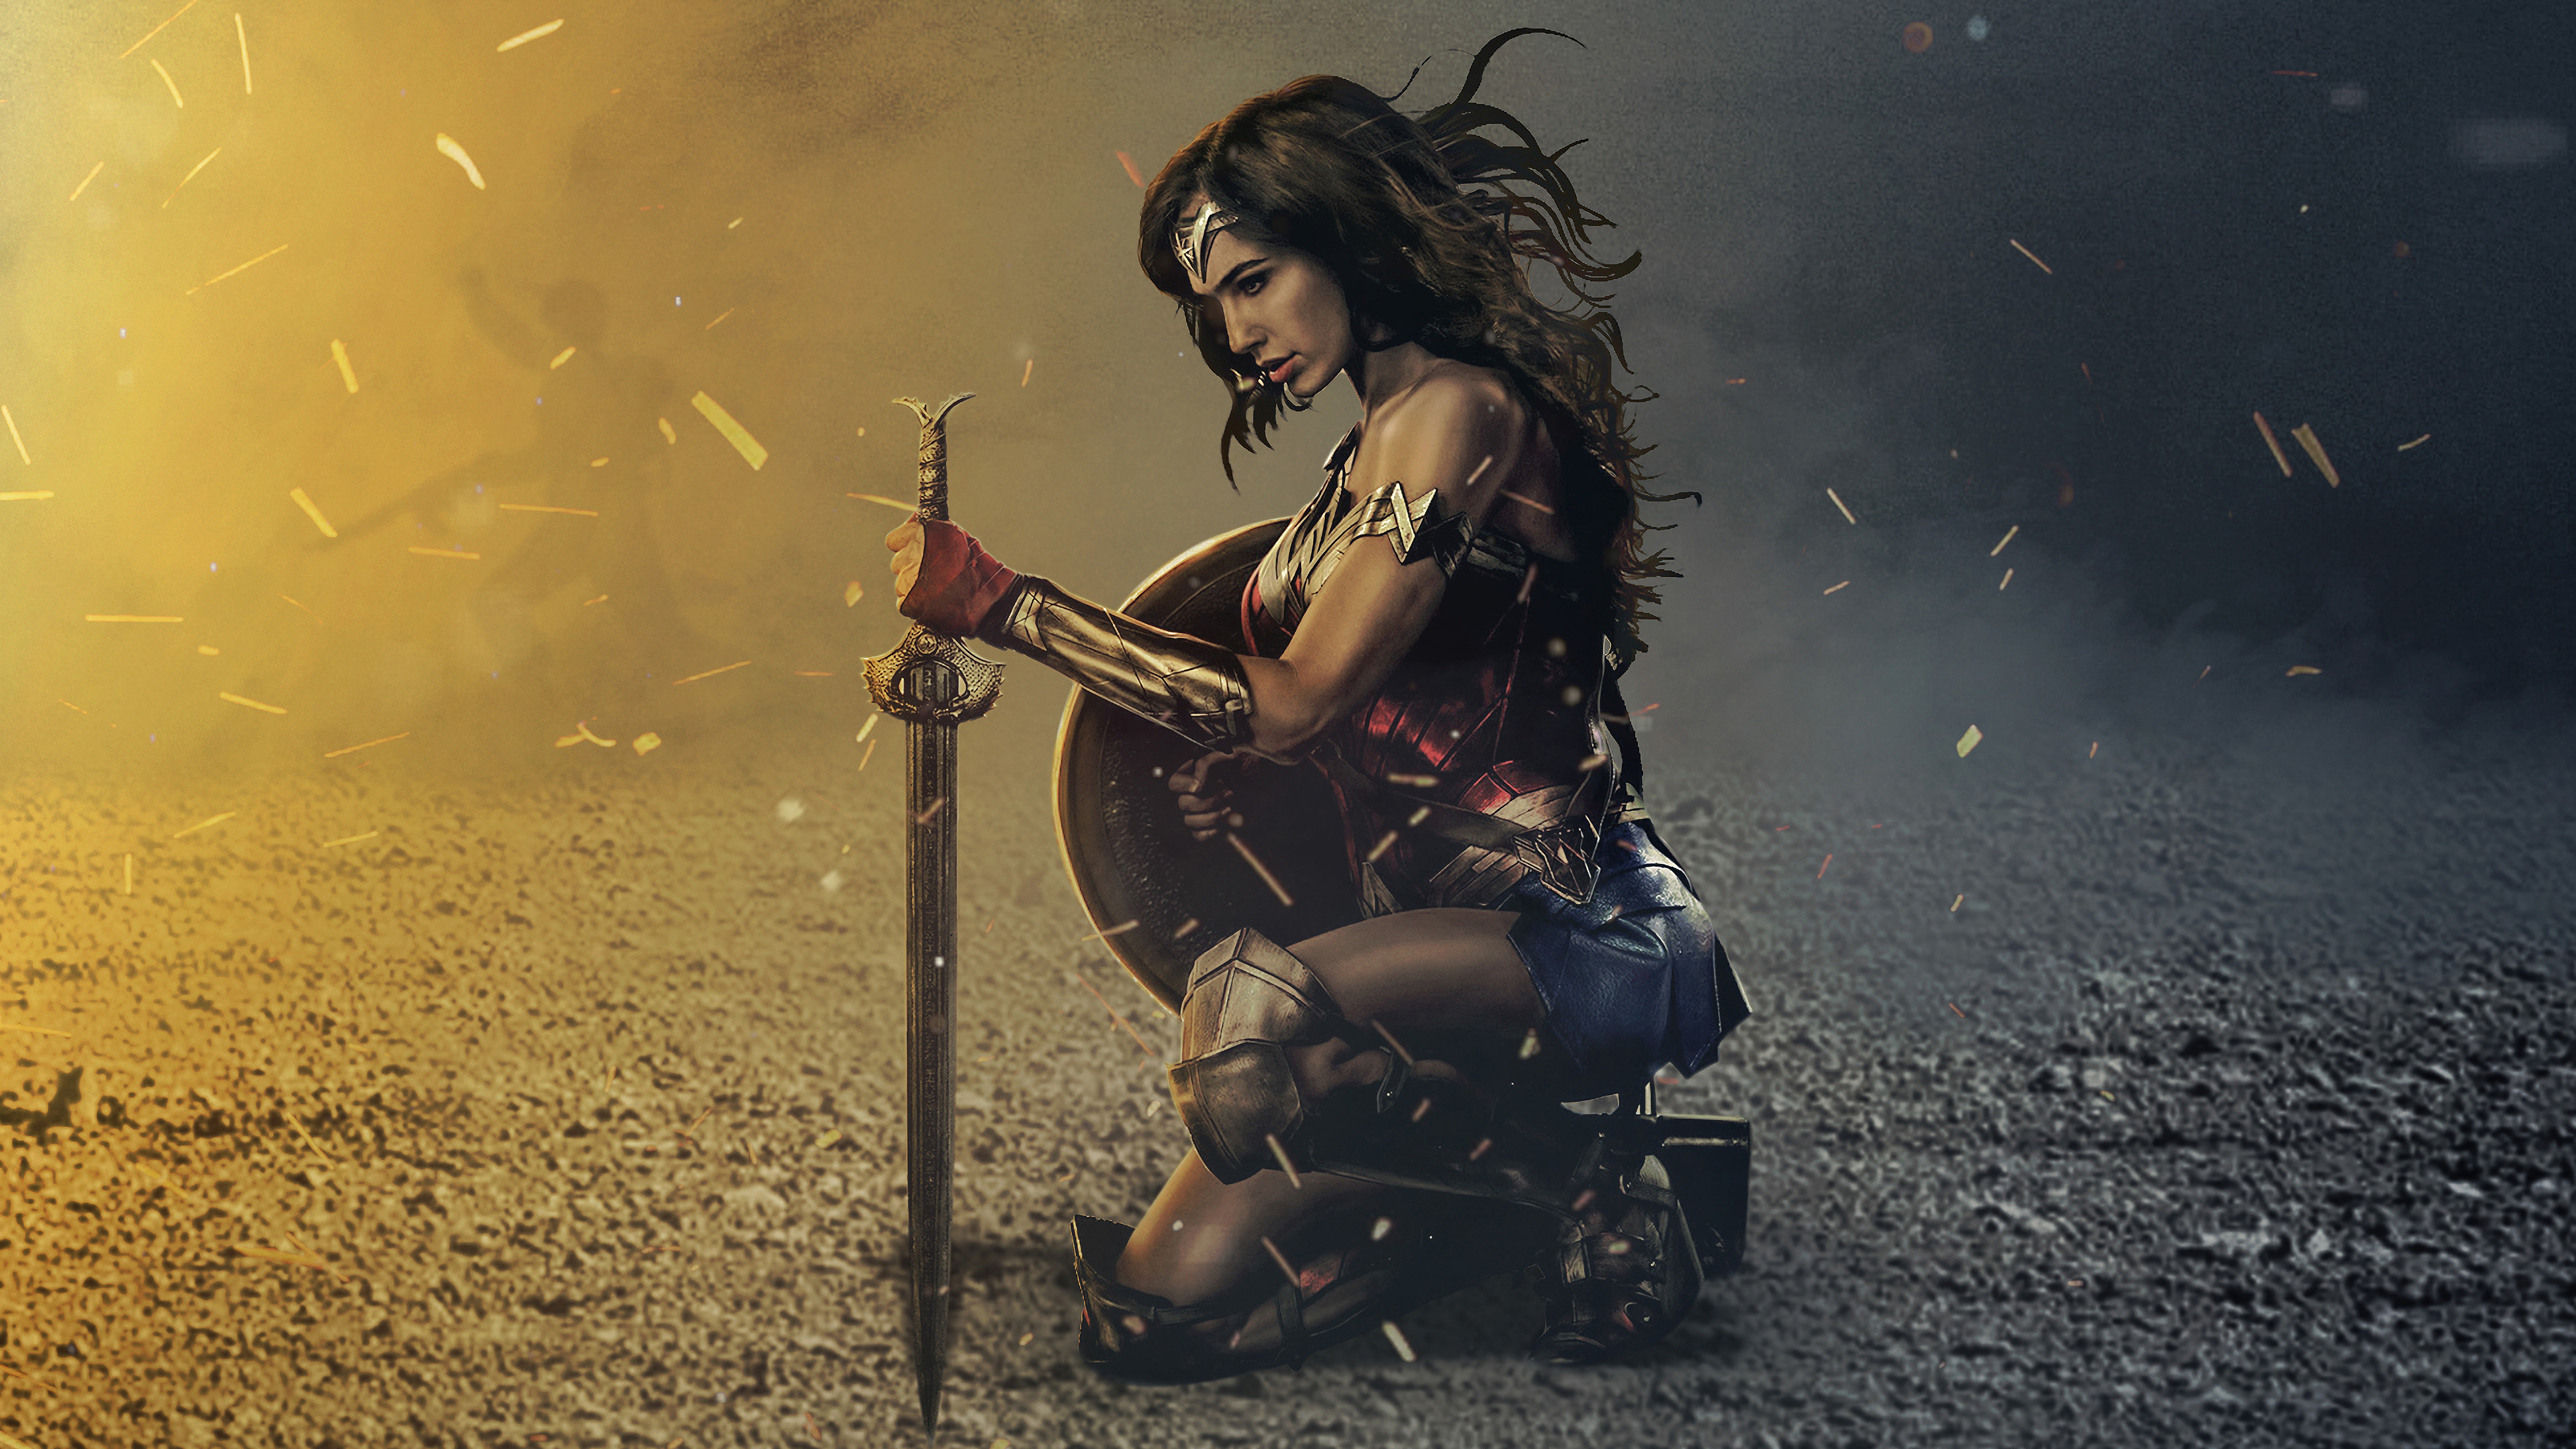 Wonder Woman HD Wallpapers and Backgrounds. 